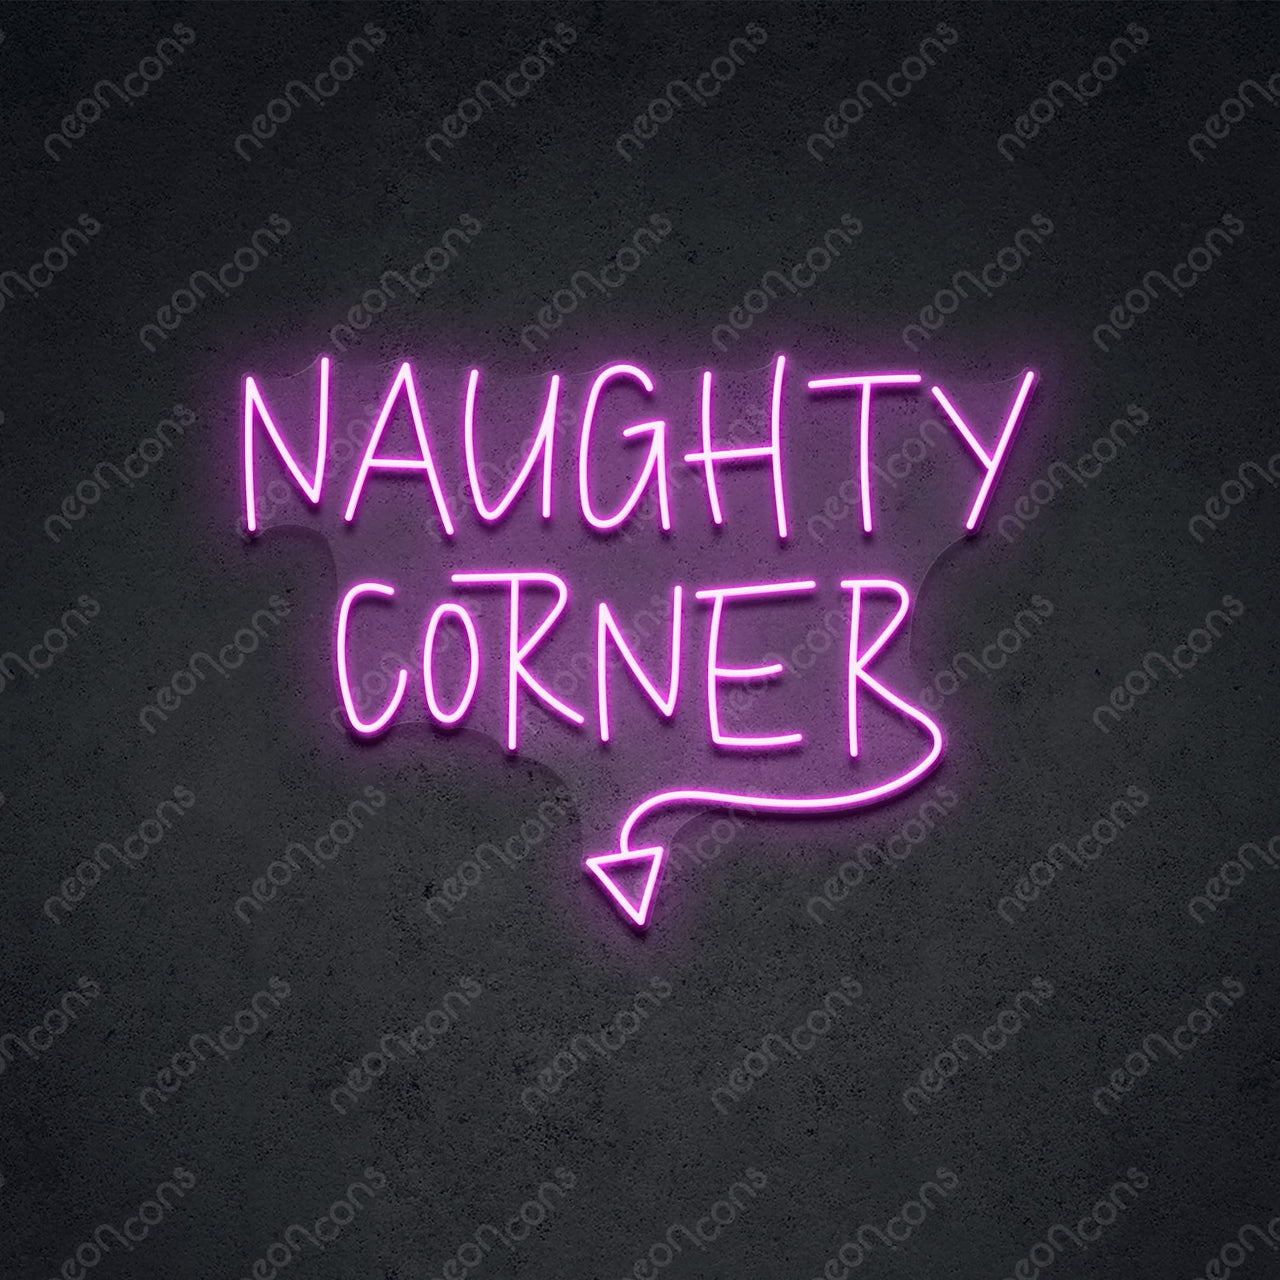 "Naughty Corner" LED Neon Sign by Neon Icons